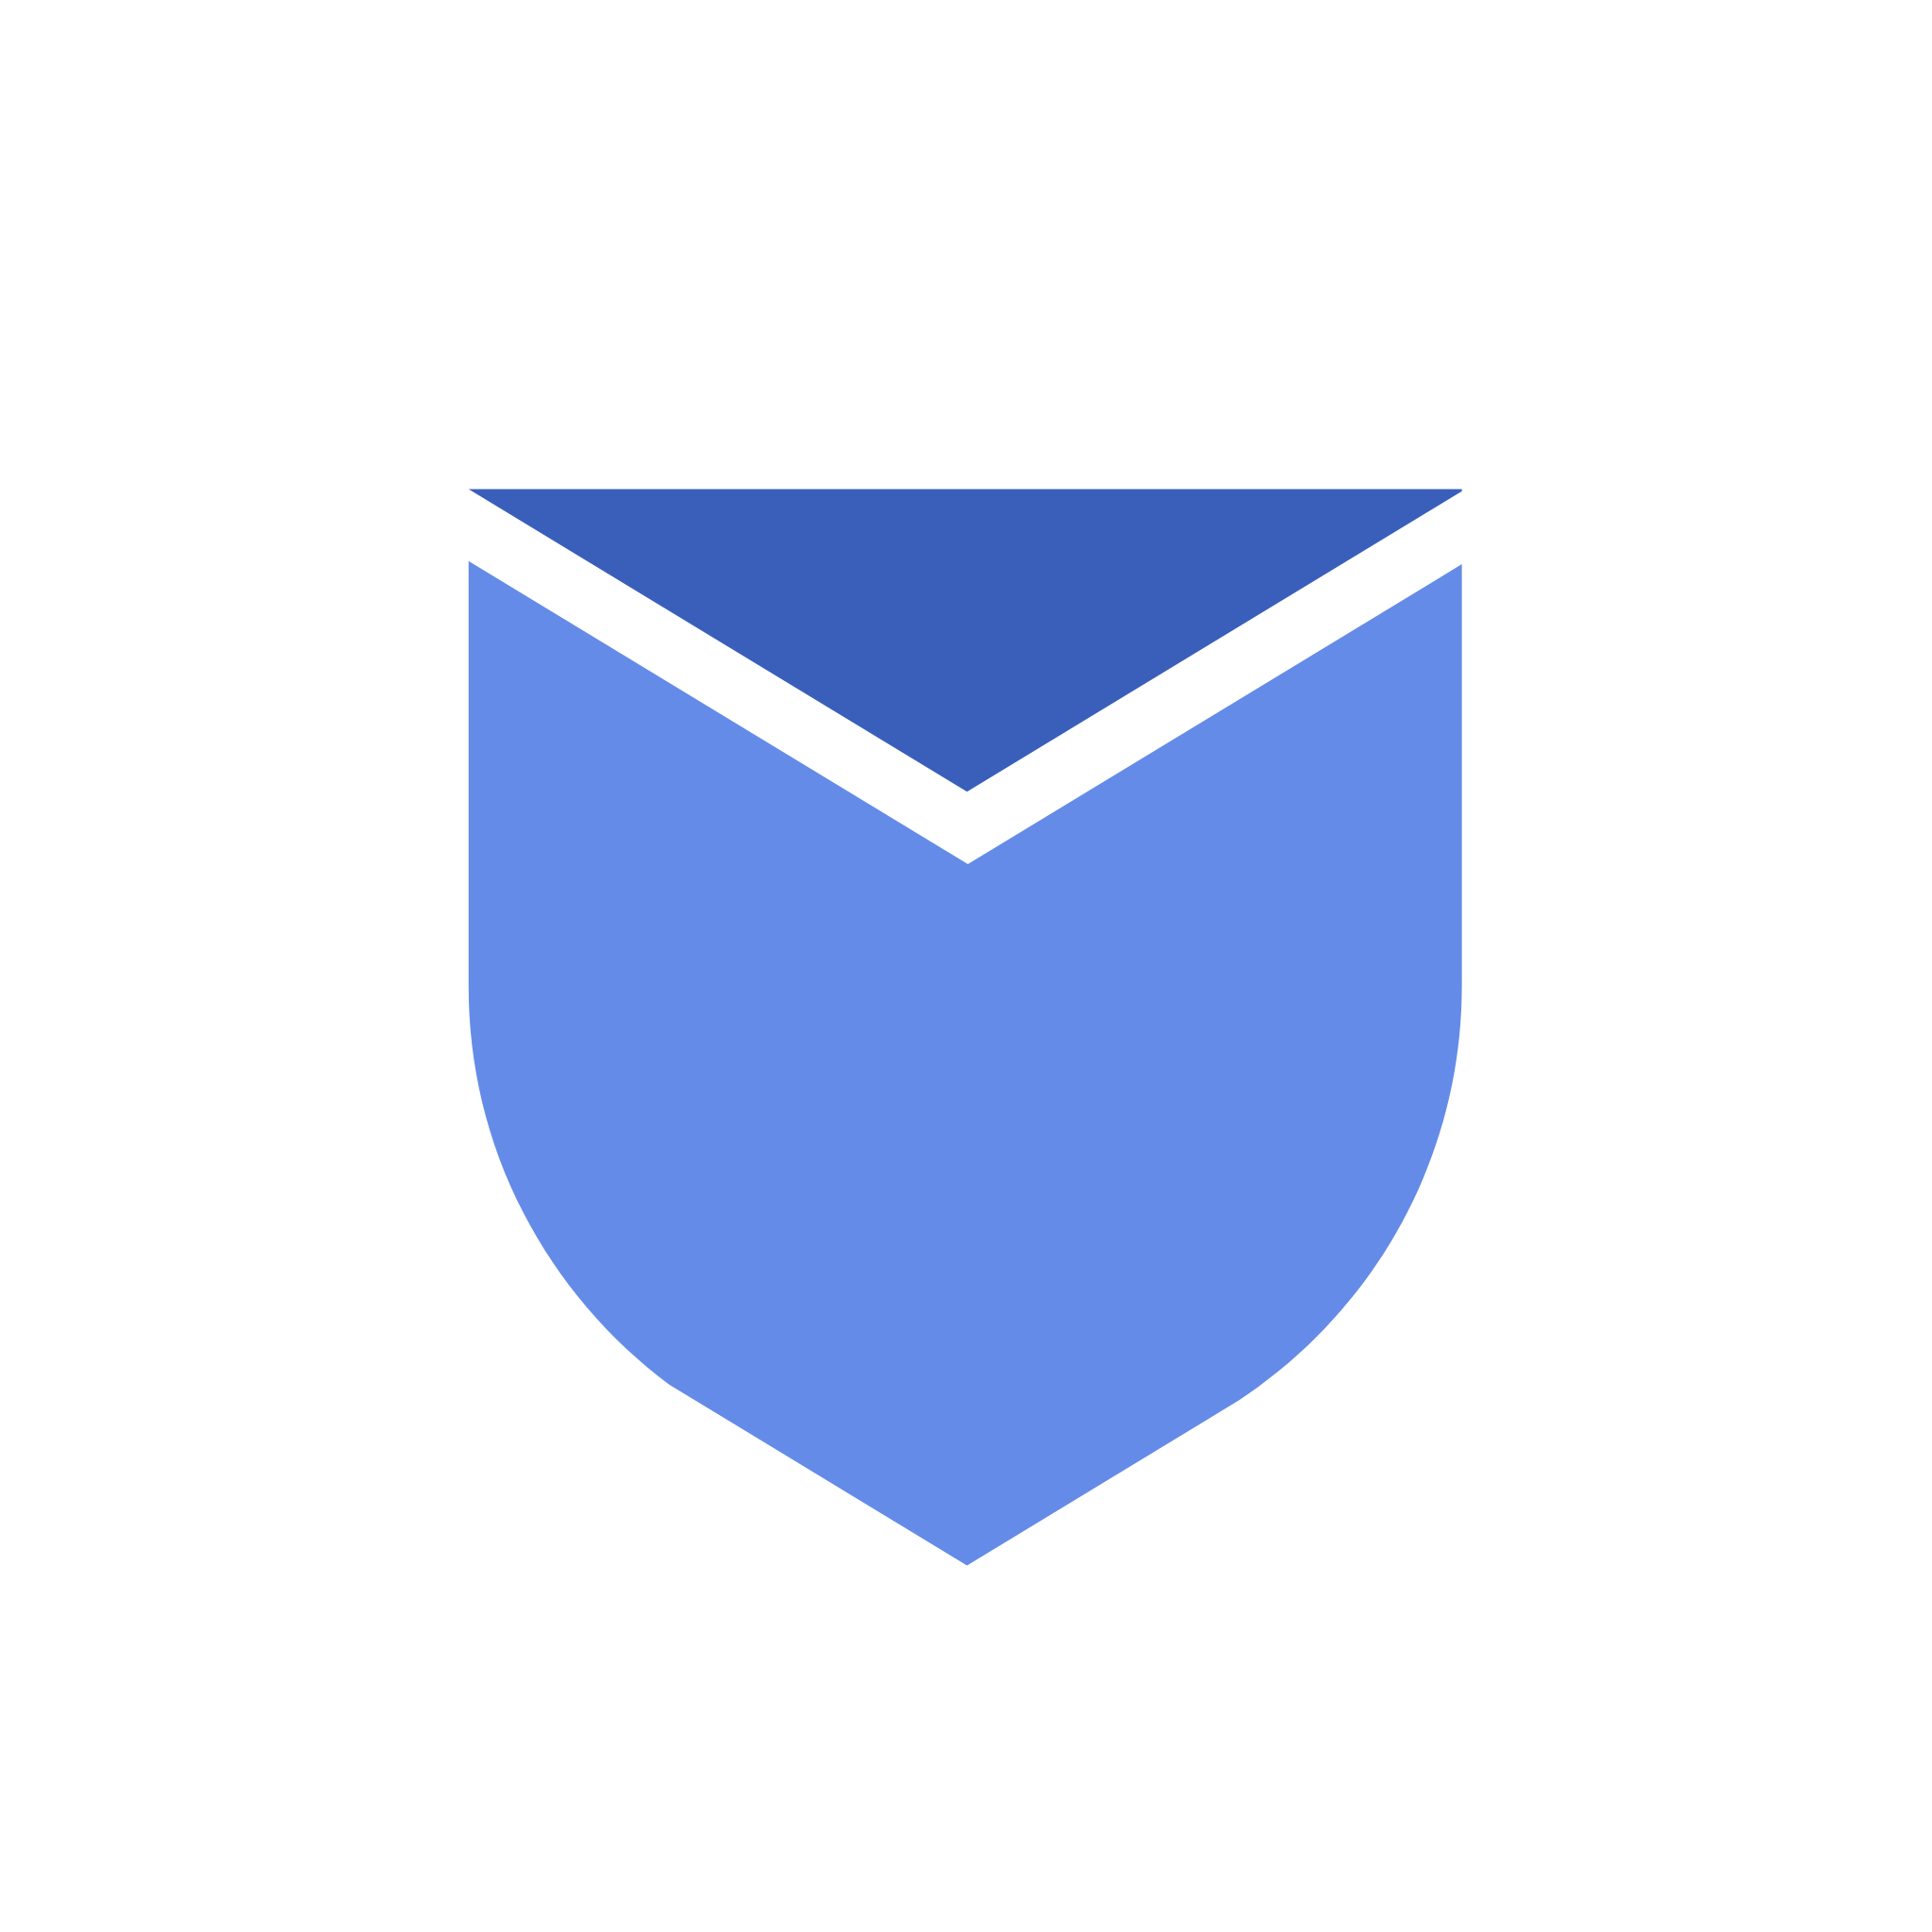 com.inbox.clean.free.gmail.unsubscribe.smart.email.fresh.mailbox